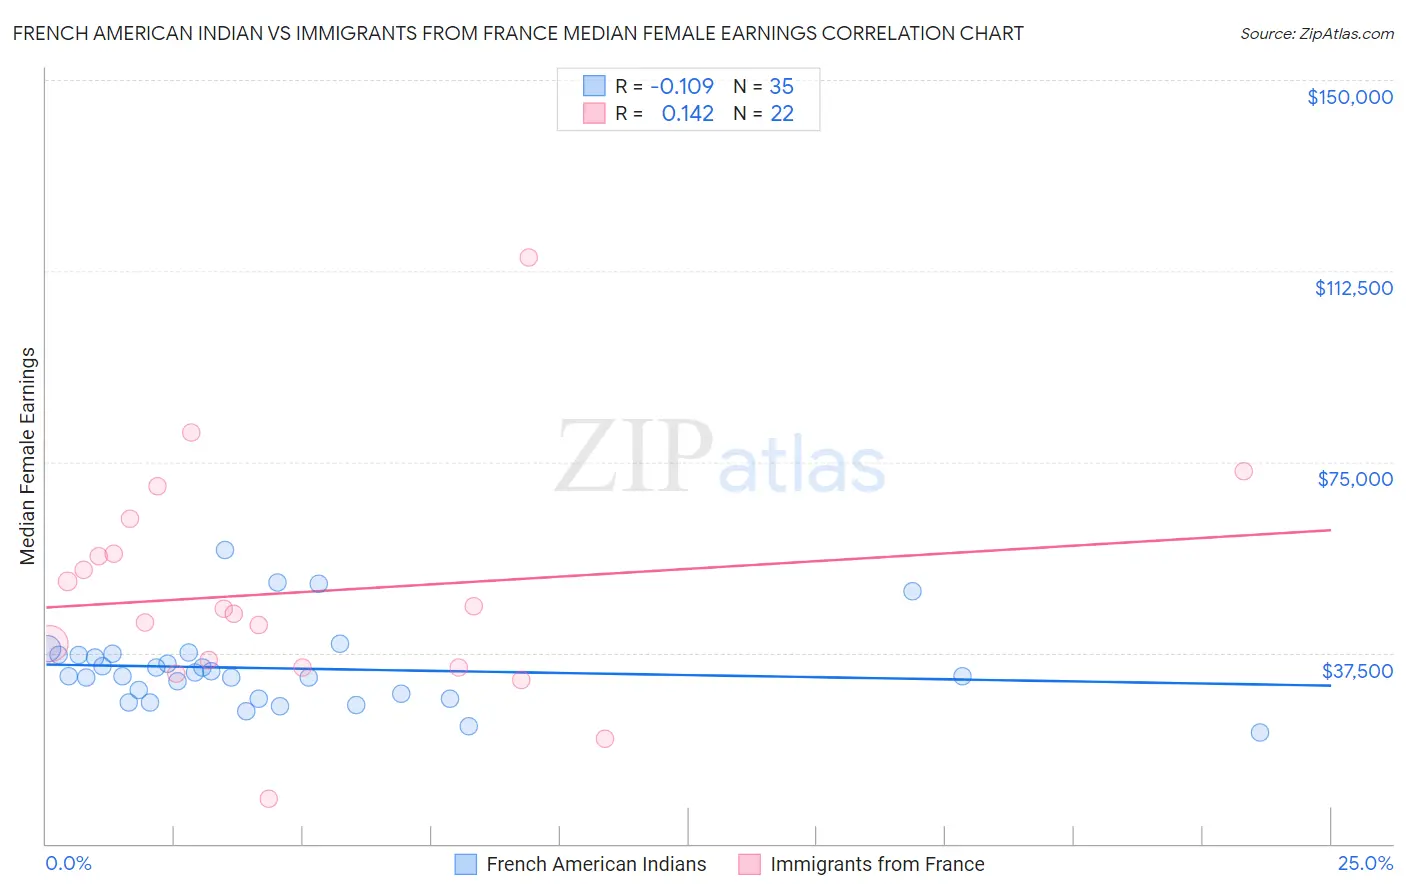 French American Indian vs Immigrants from France Median Female Earnings